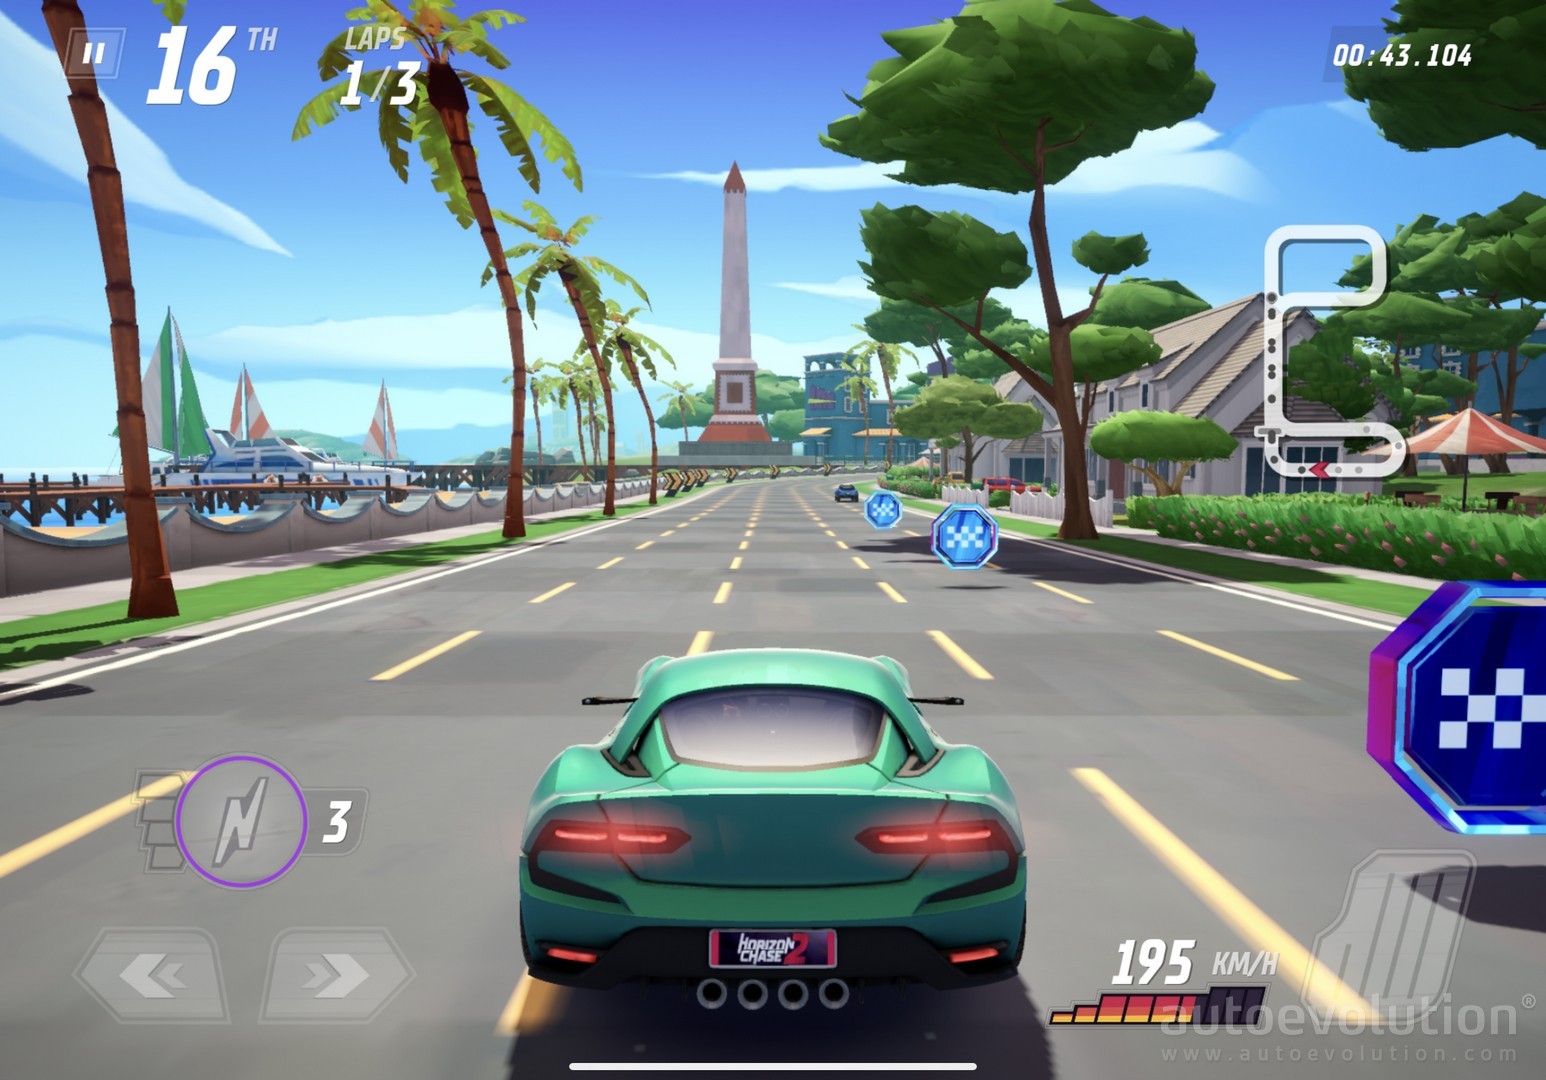 instal the new for android Horizon Chase 2